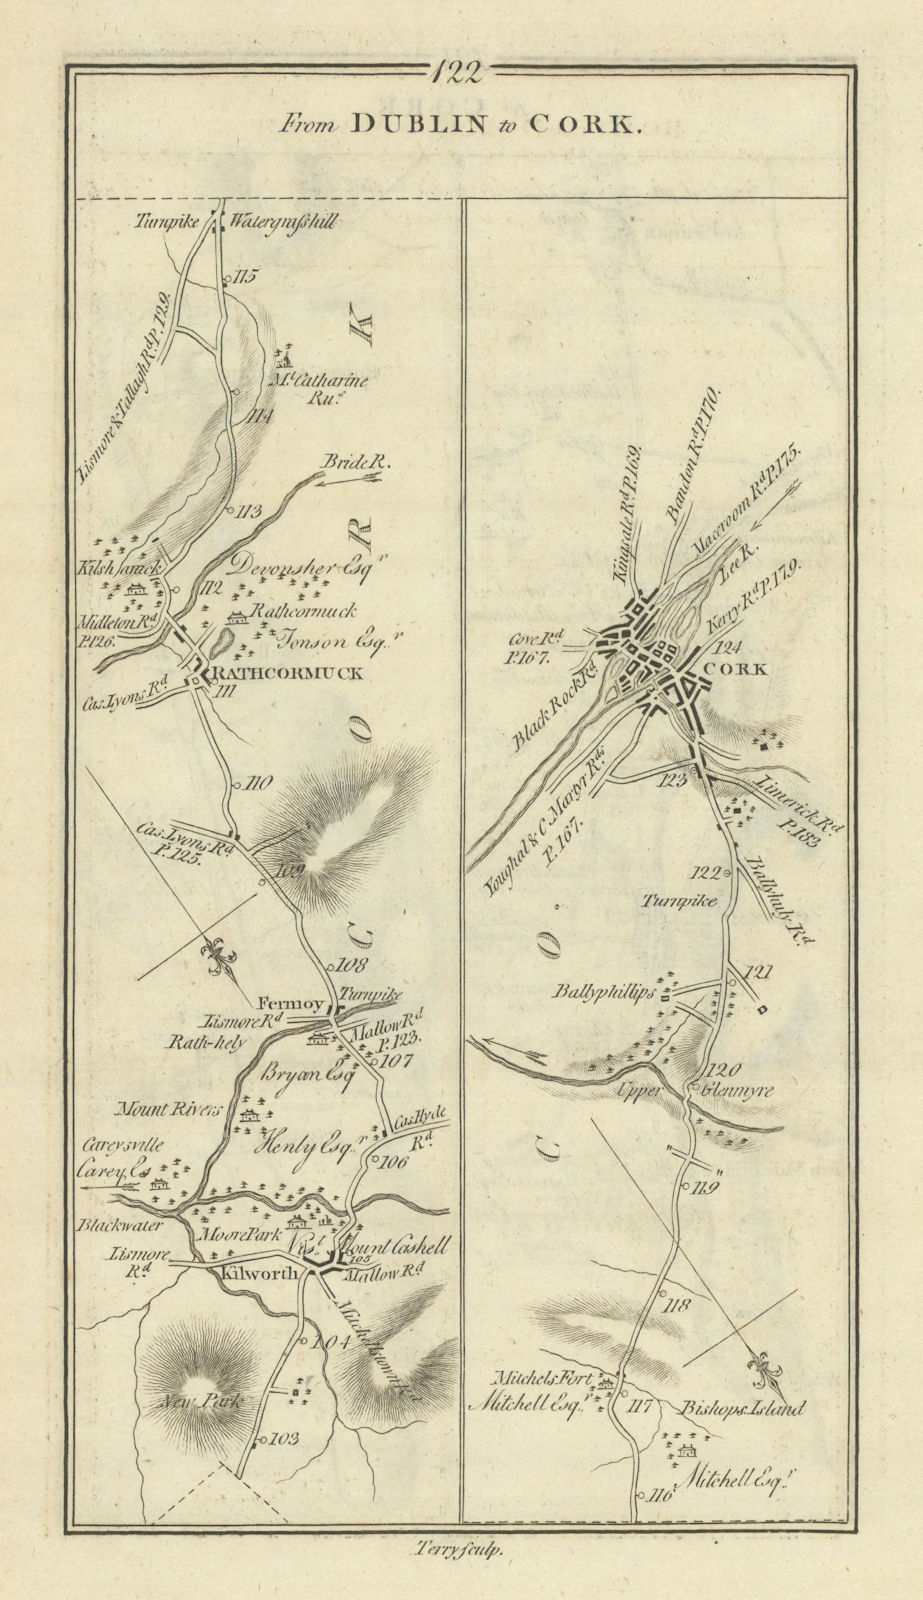 #122 Dublin to Cork. Rathcormac Fermoy Kilworth. TAYLOR/SKINNER 1778 old map